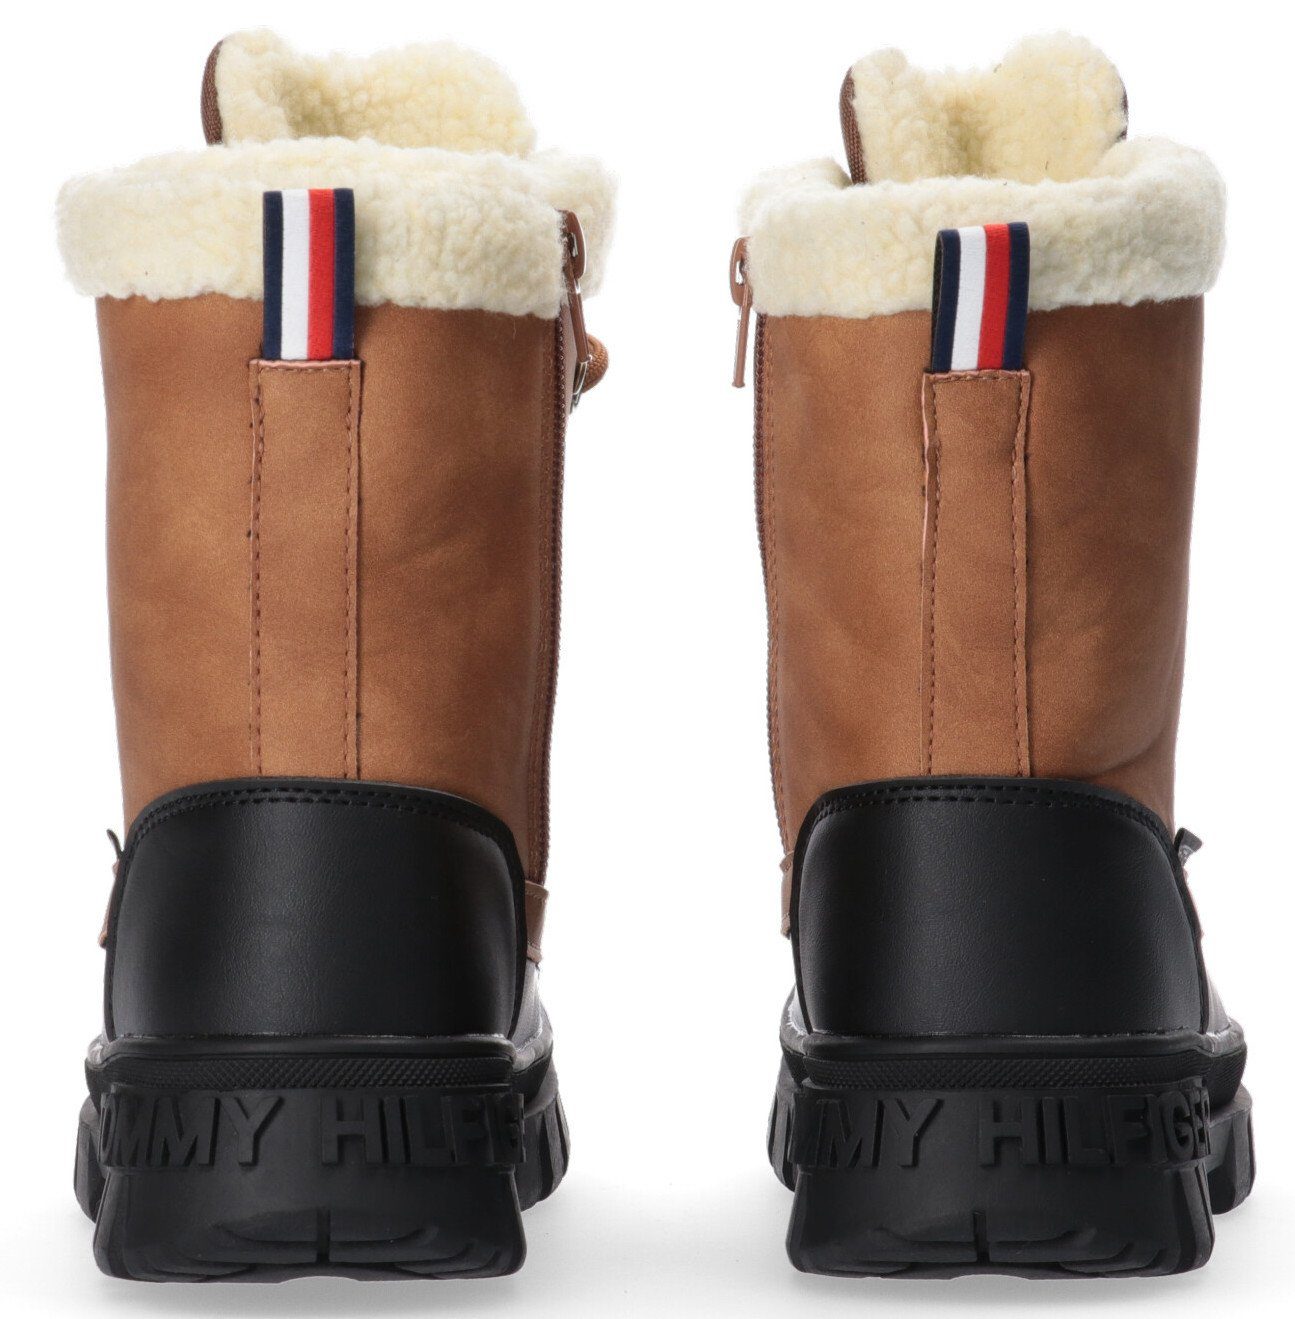 LACE-UP Hilfiger Tommy BOOT Warmfutter Thermostiefel mit Snowboots